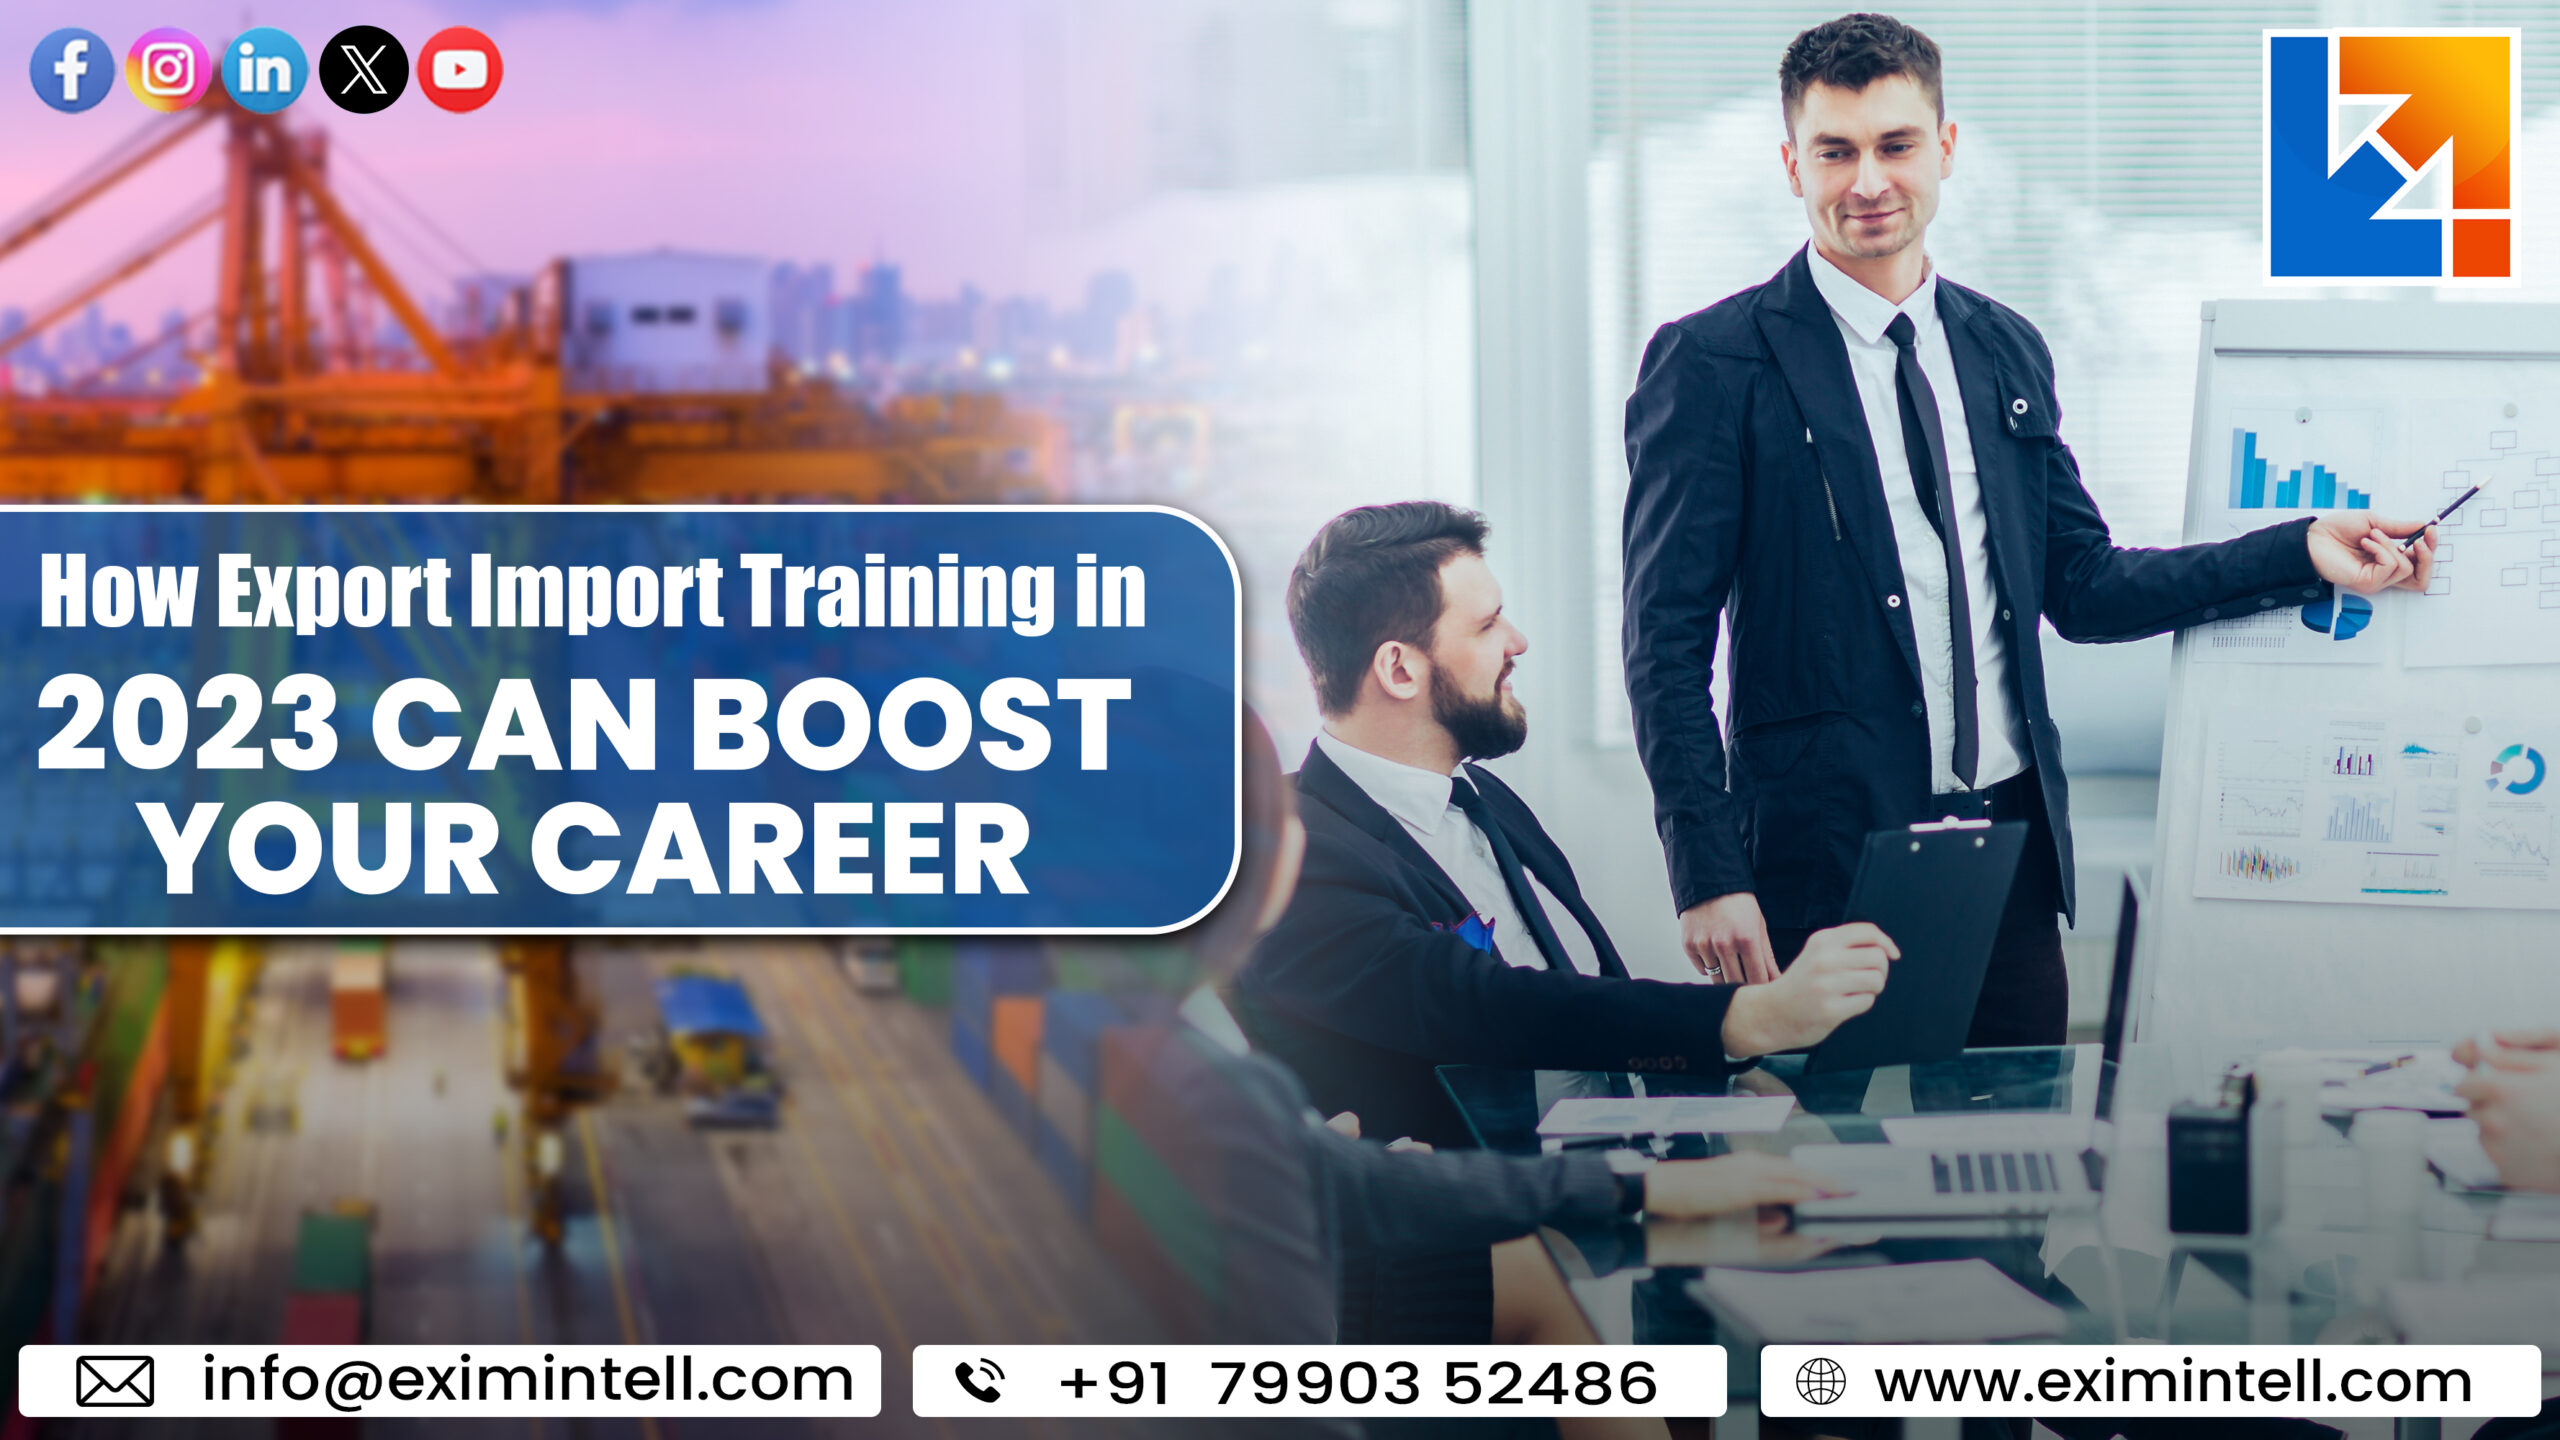 How Export Import Training in 2023 Can Boost Your Career